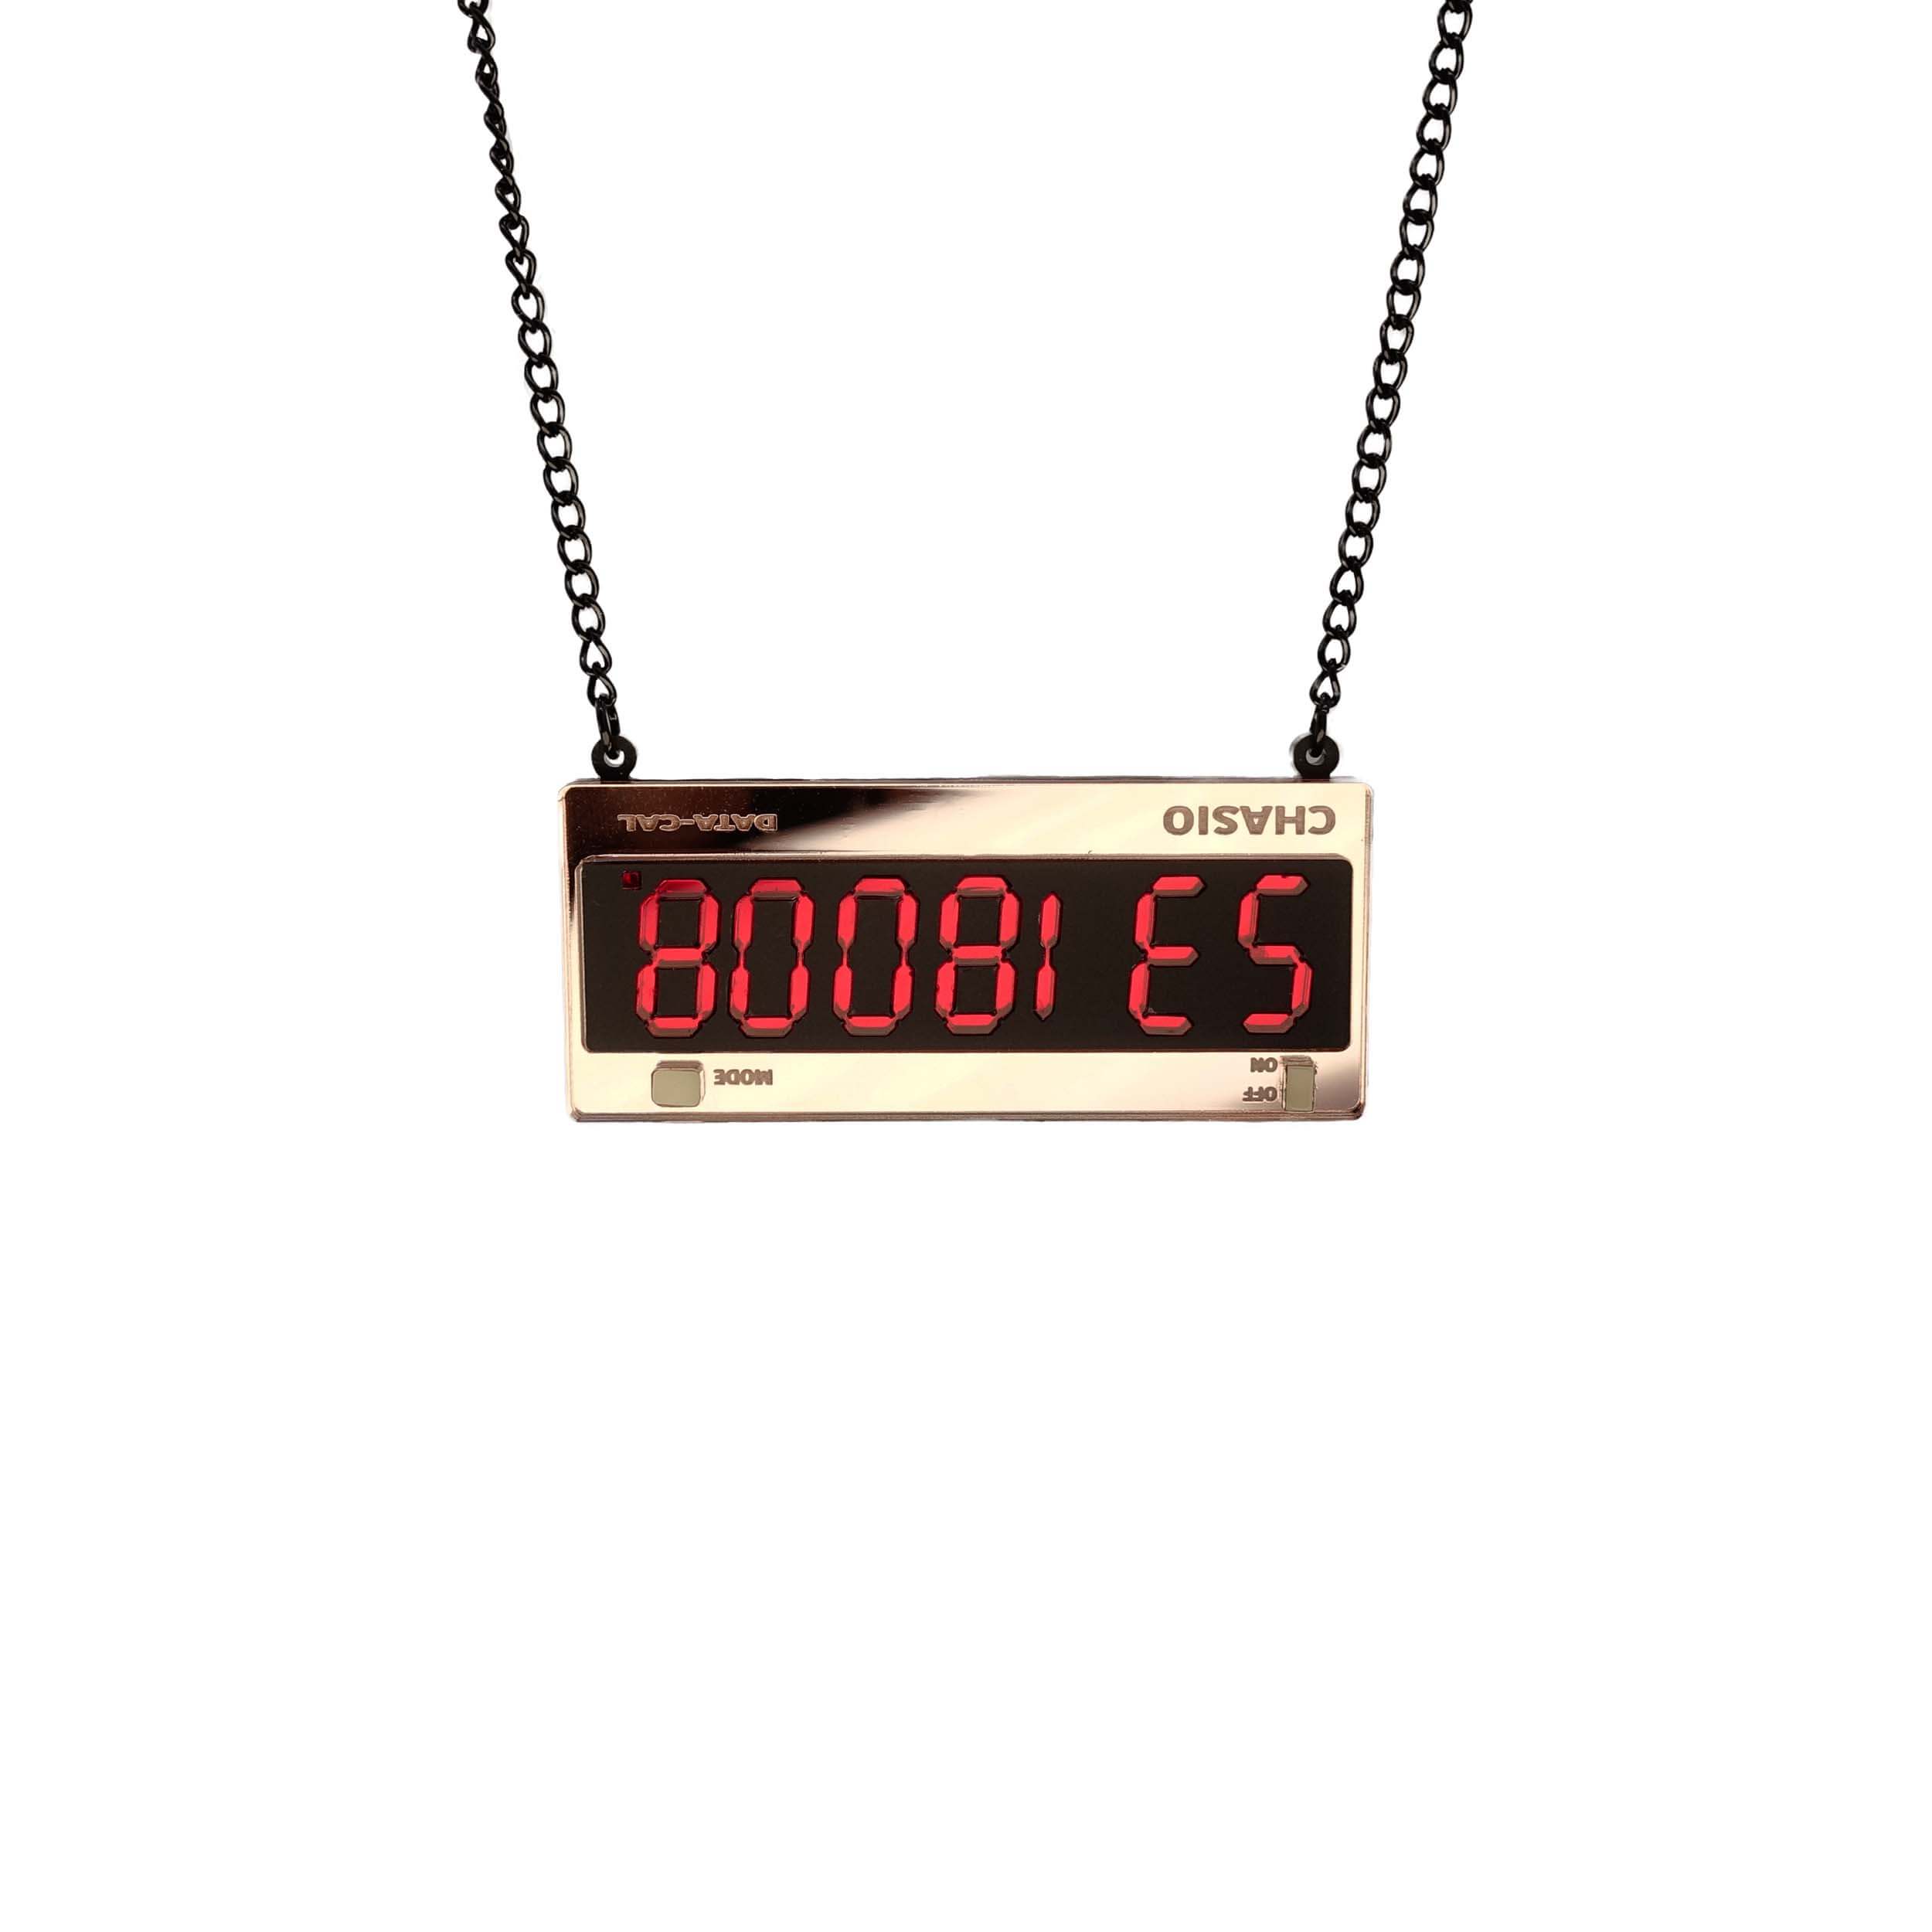 Calculator BOOBIES necklace designed by Sarah Day for Wear and Resist. Cool retro jewellery that no one else has! 